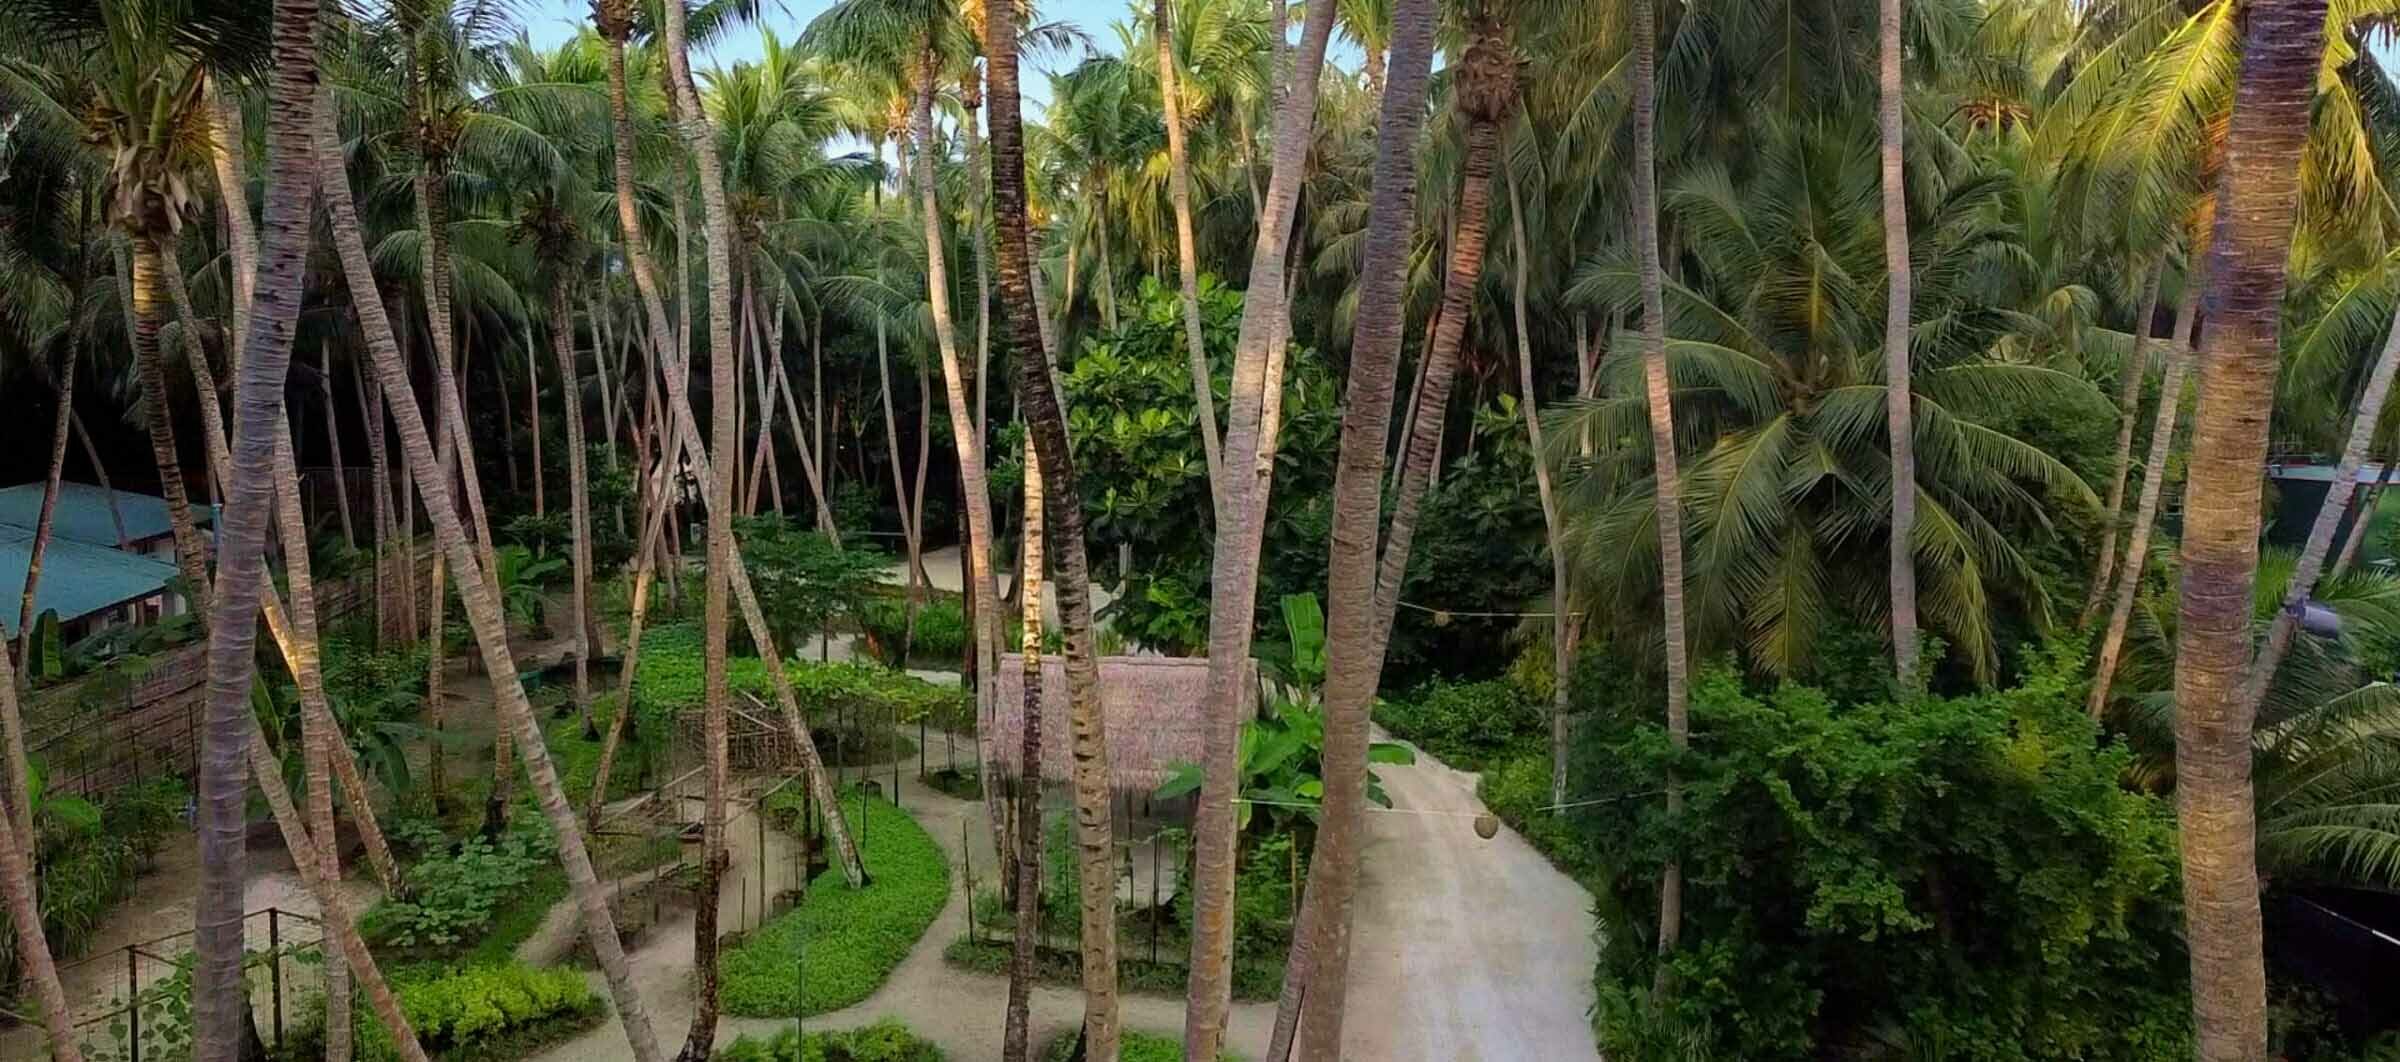 The pathways and lush greenery at Amilla, an eco-friendly resort.